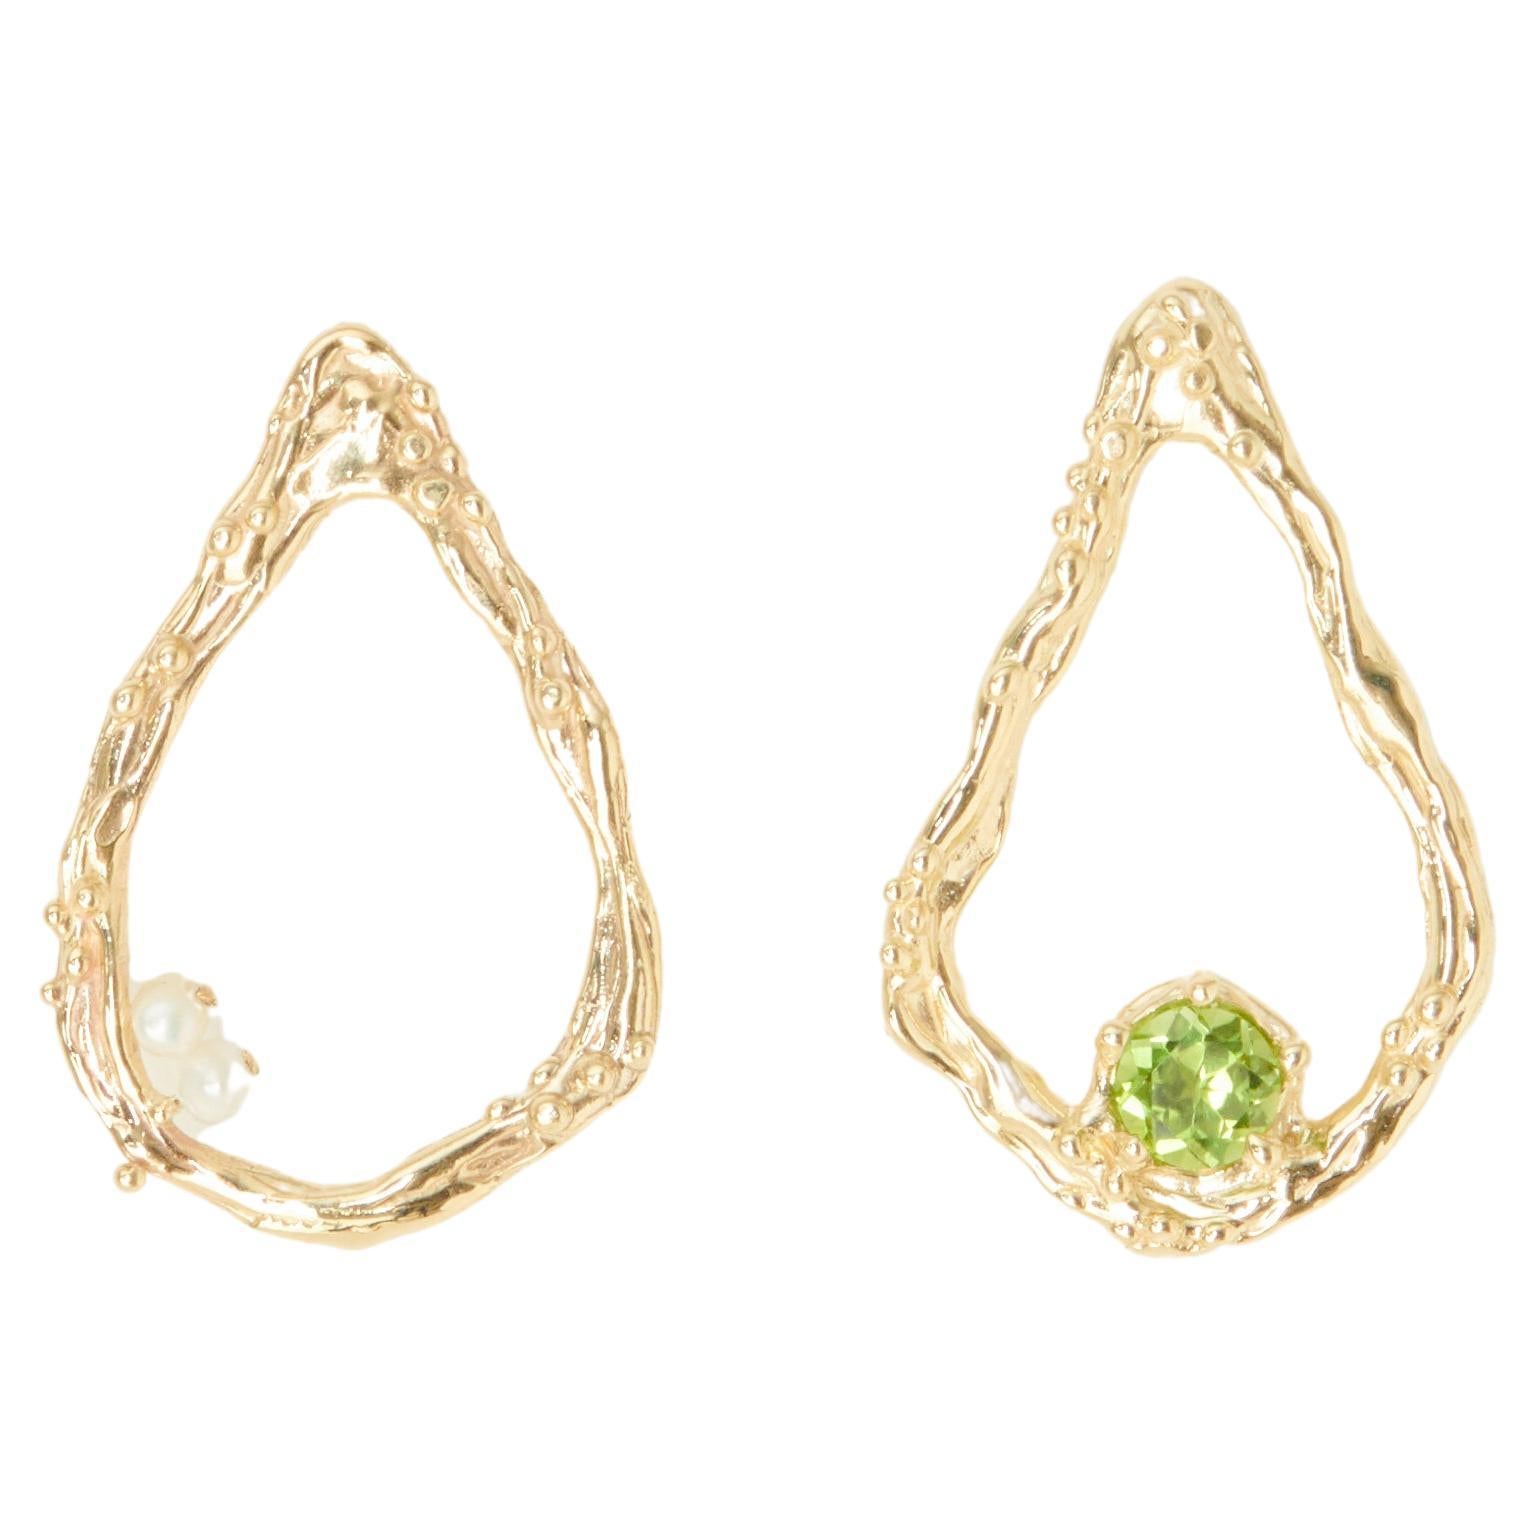 Drop earrings with Peridot and Pearls